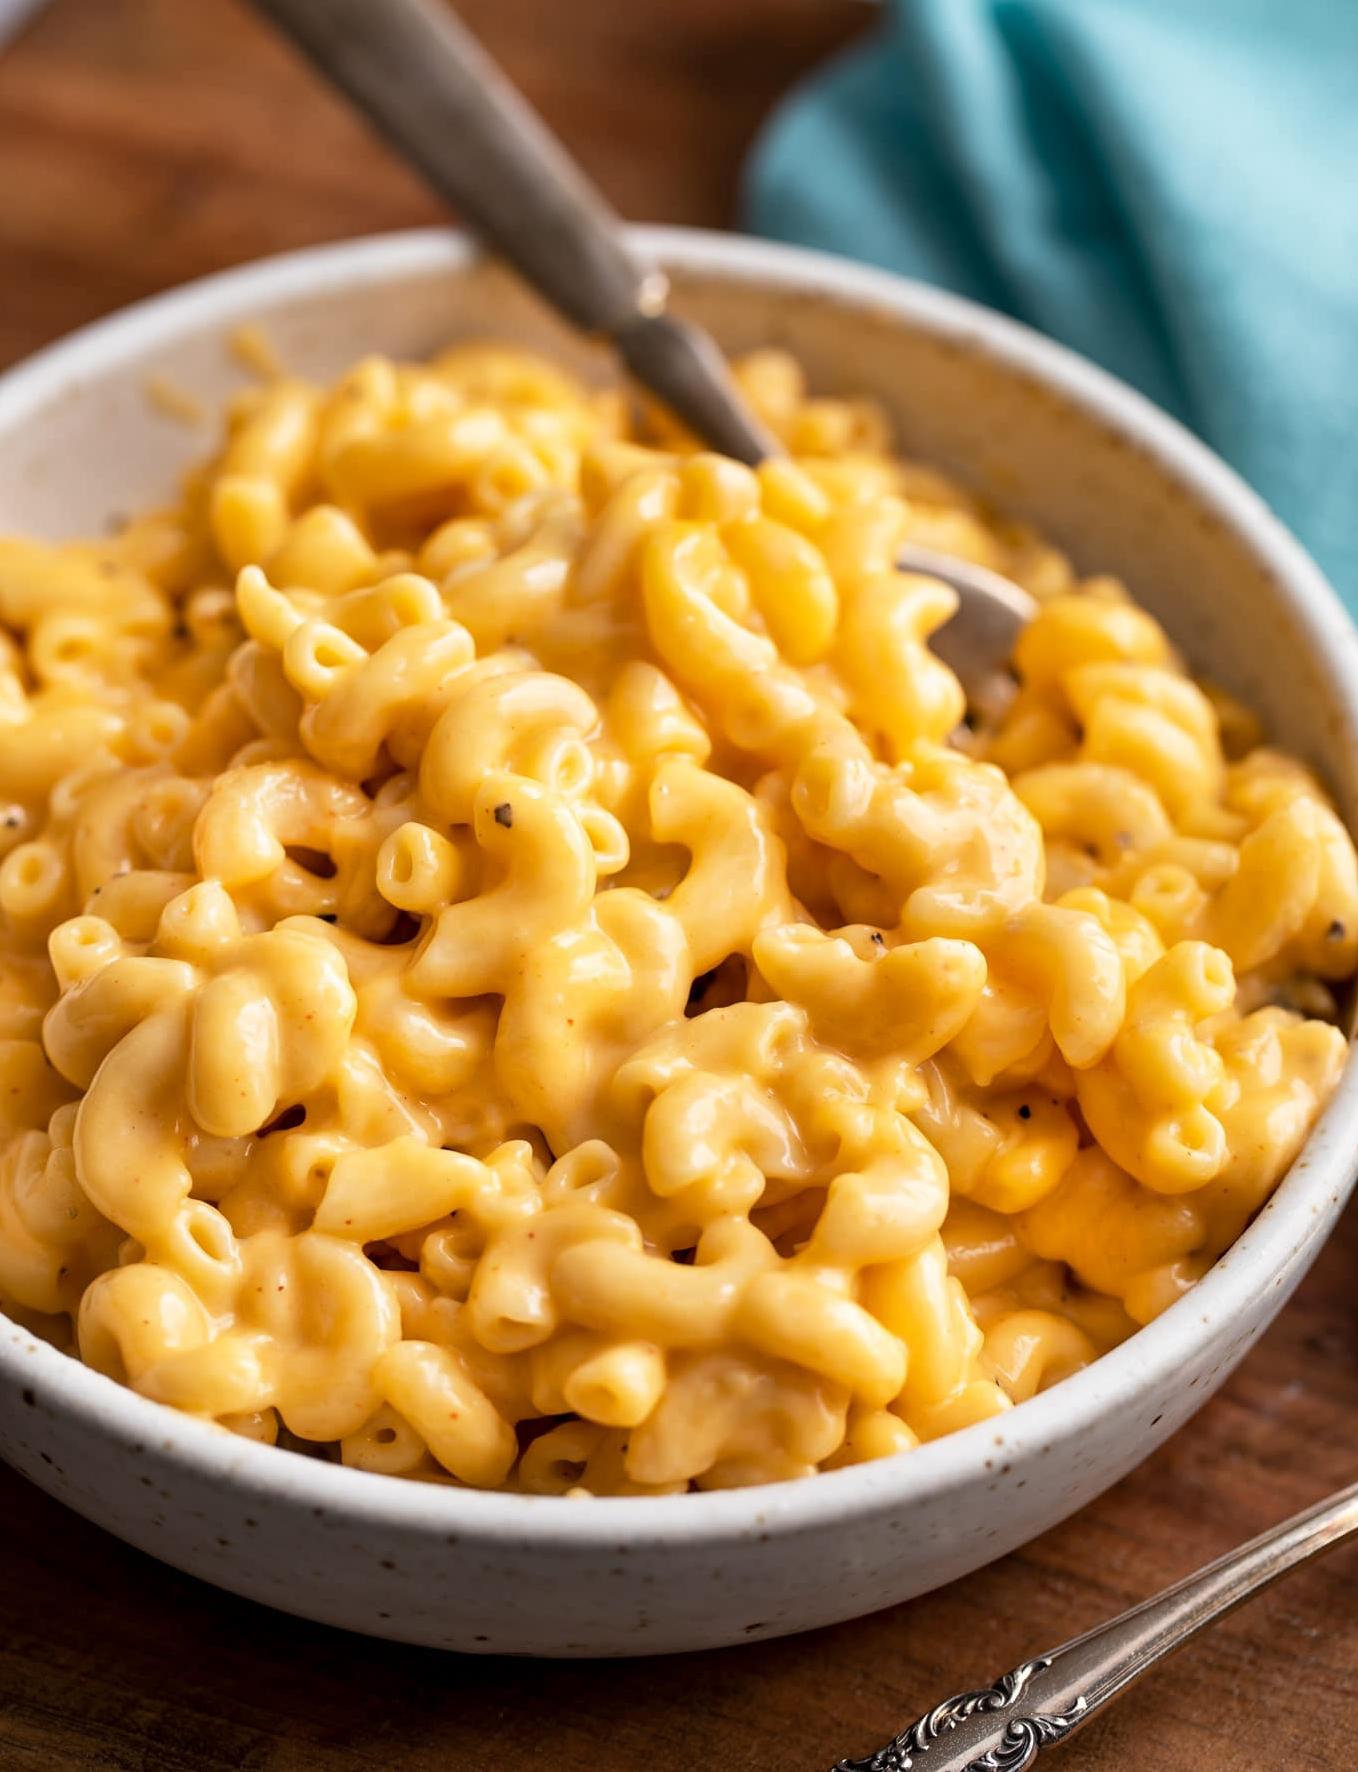  Creamy and dreamy comfort food